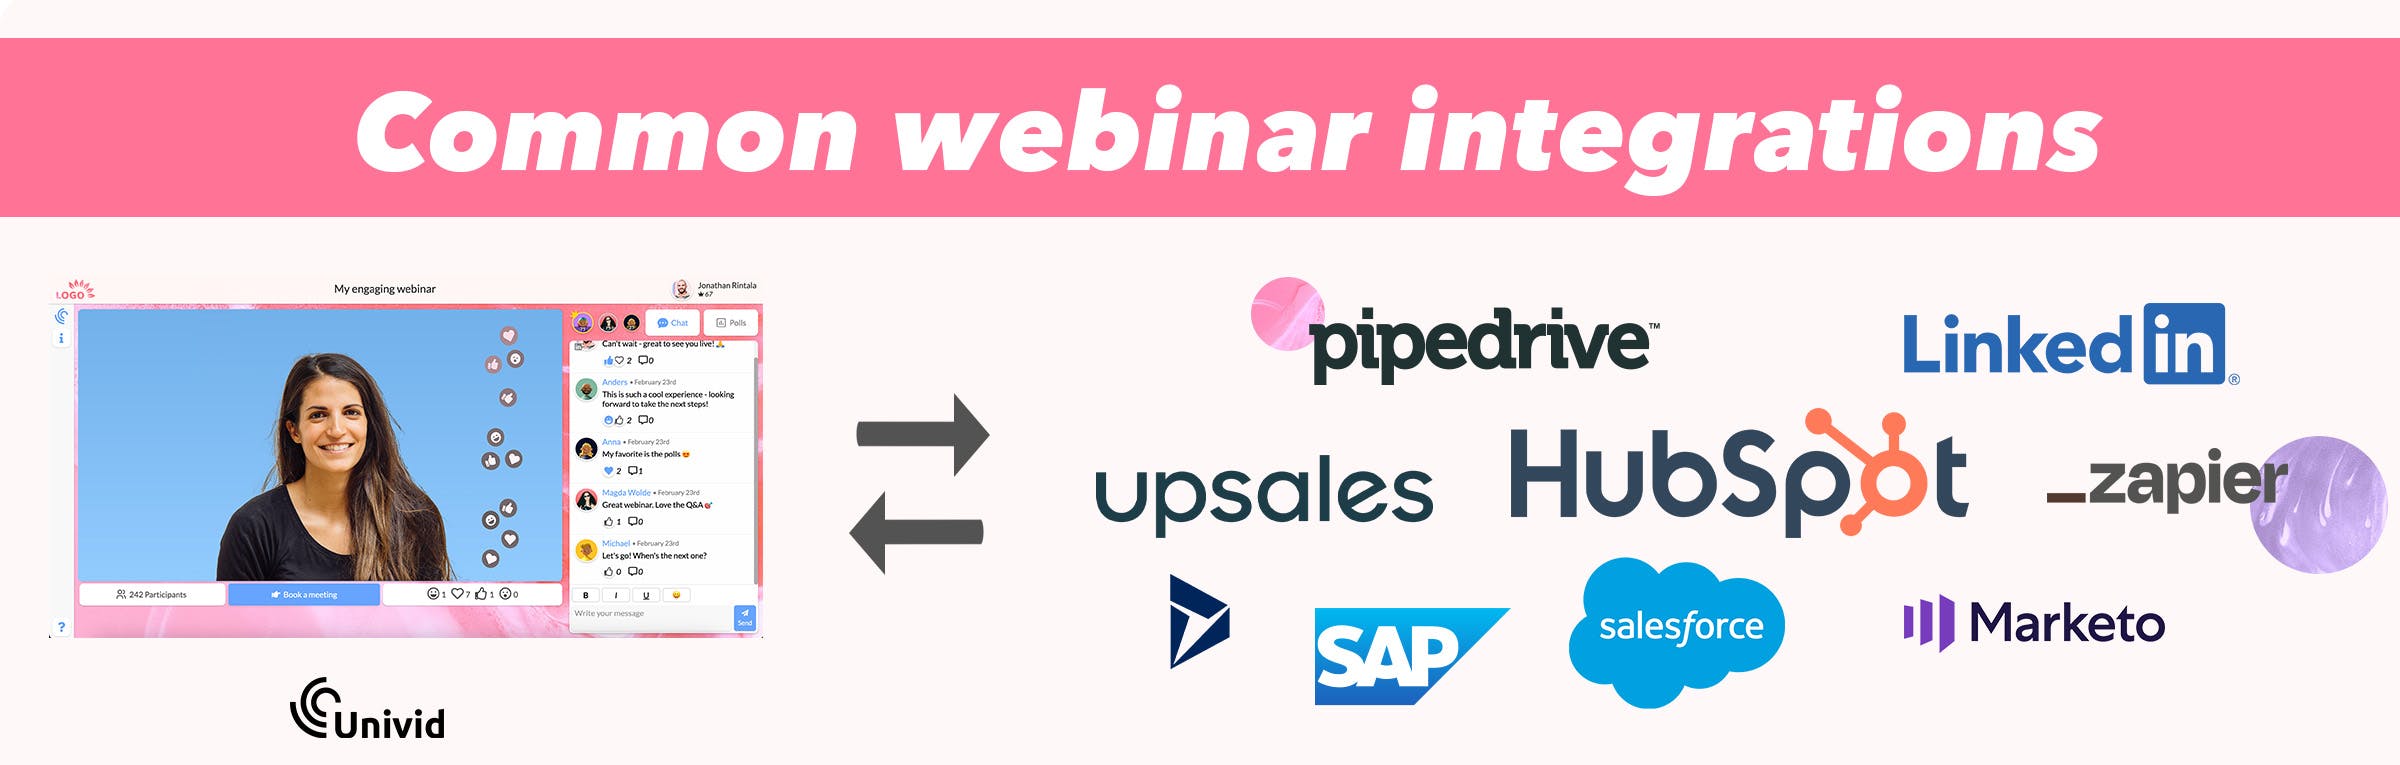 Examples of common webinar integrations